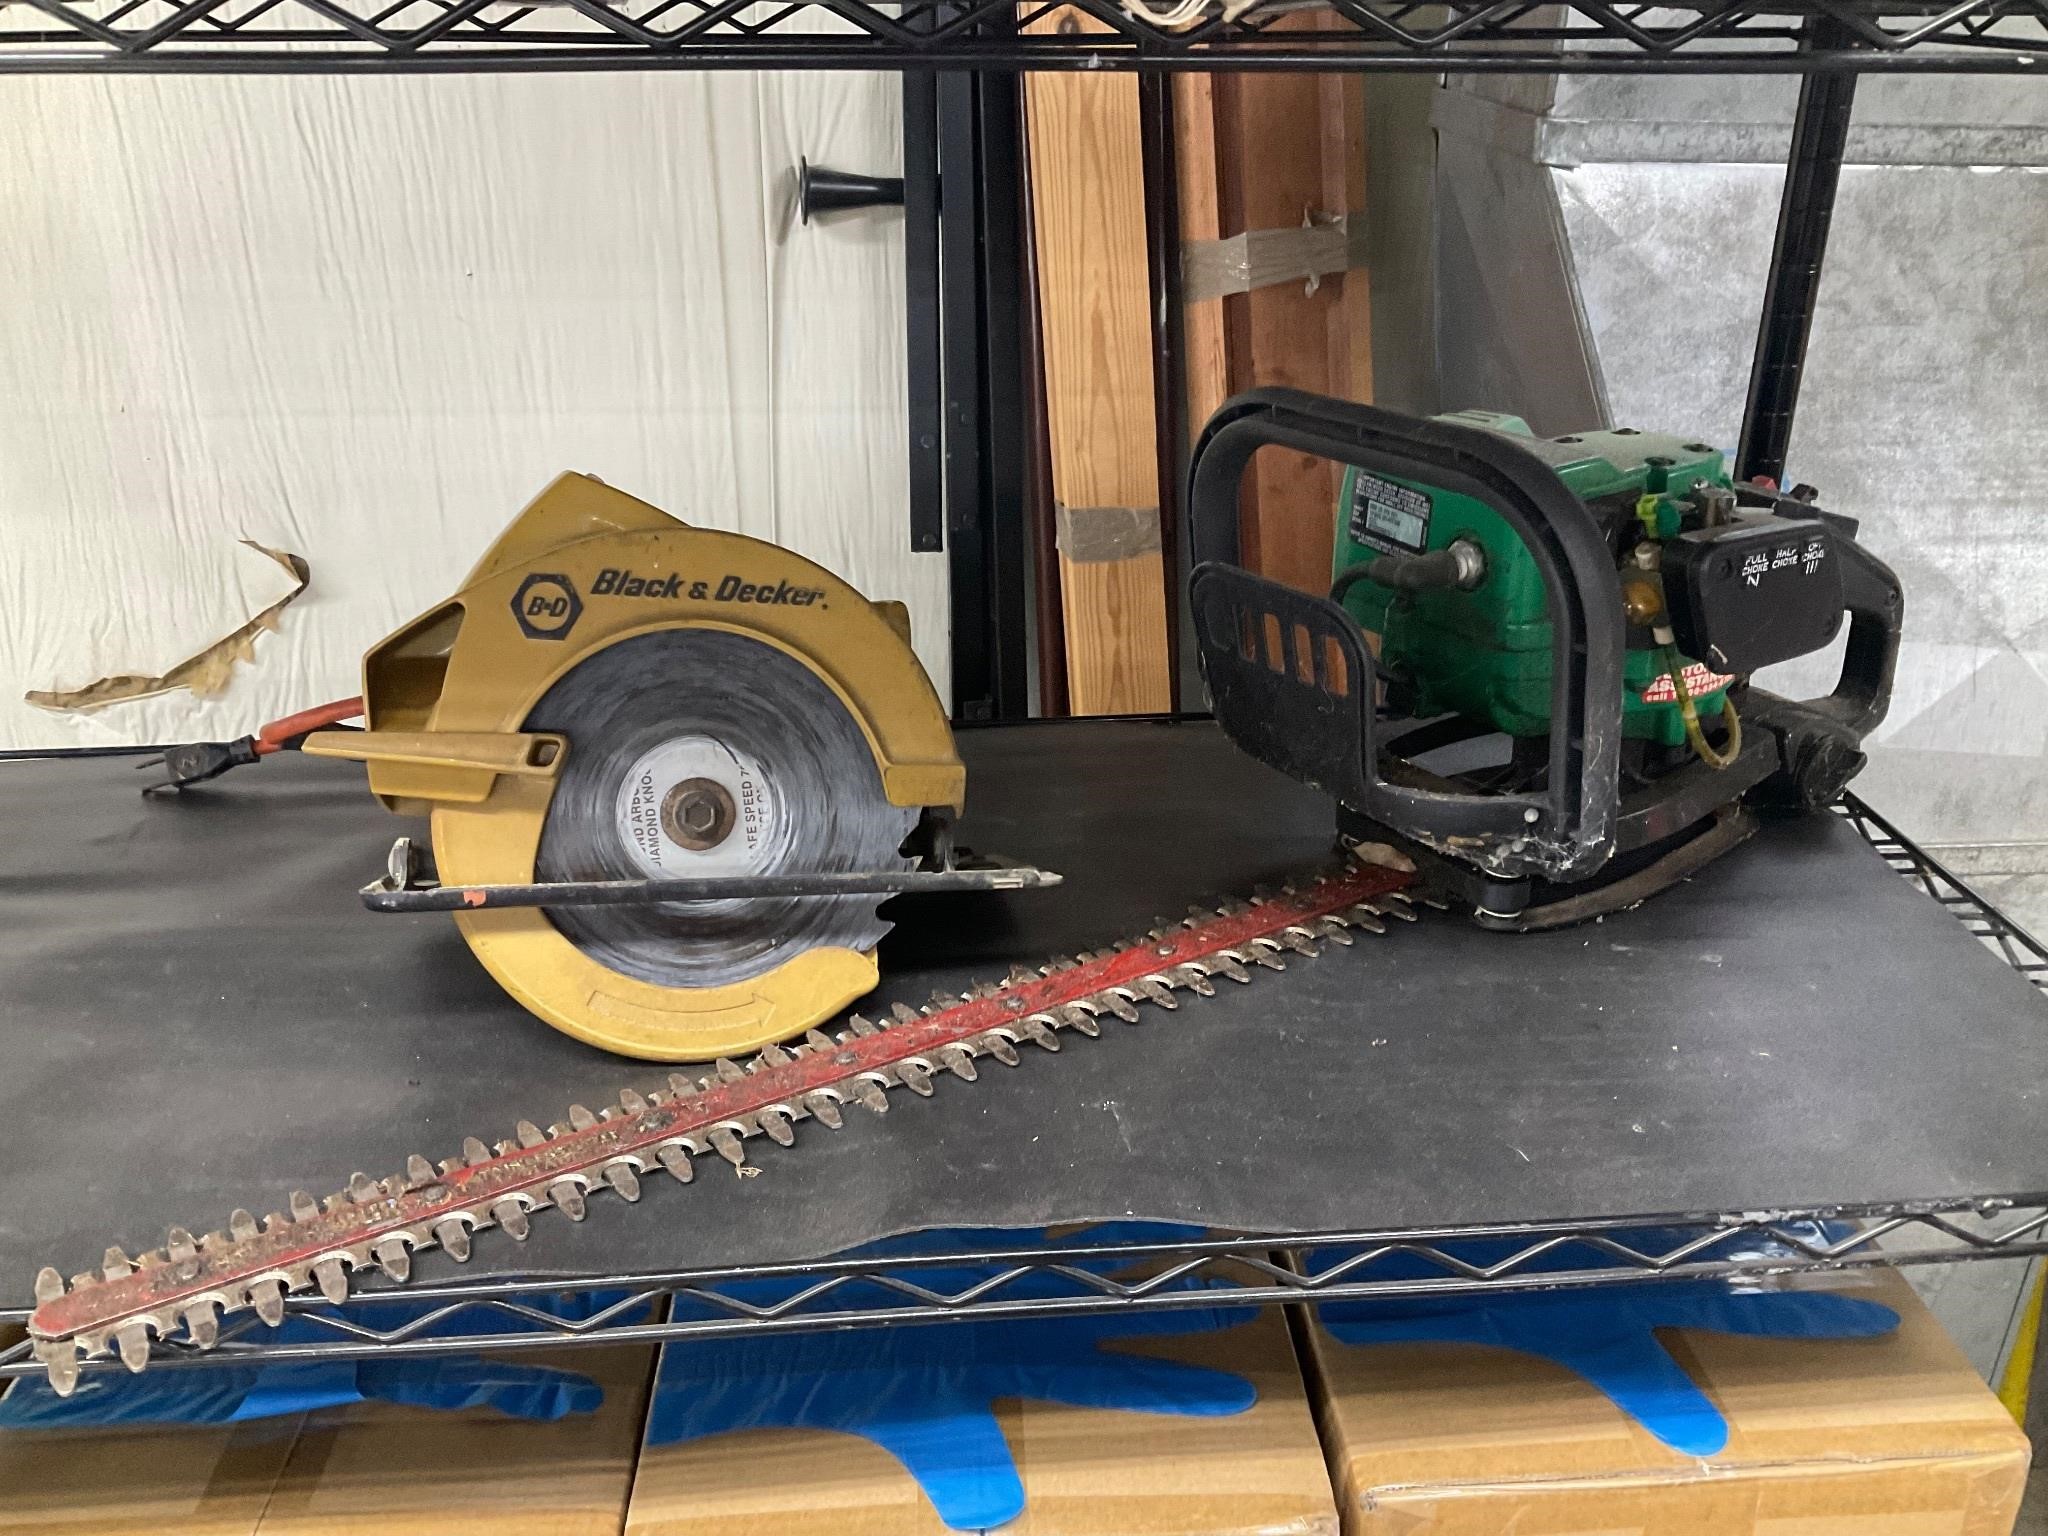 Saw and hedge trimmer